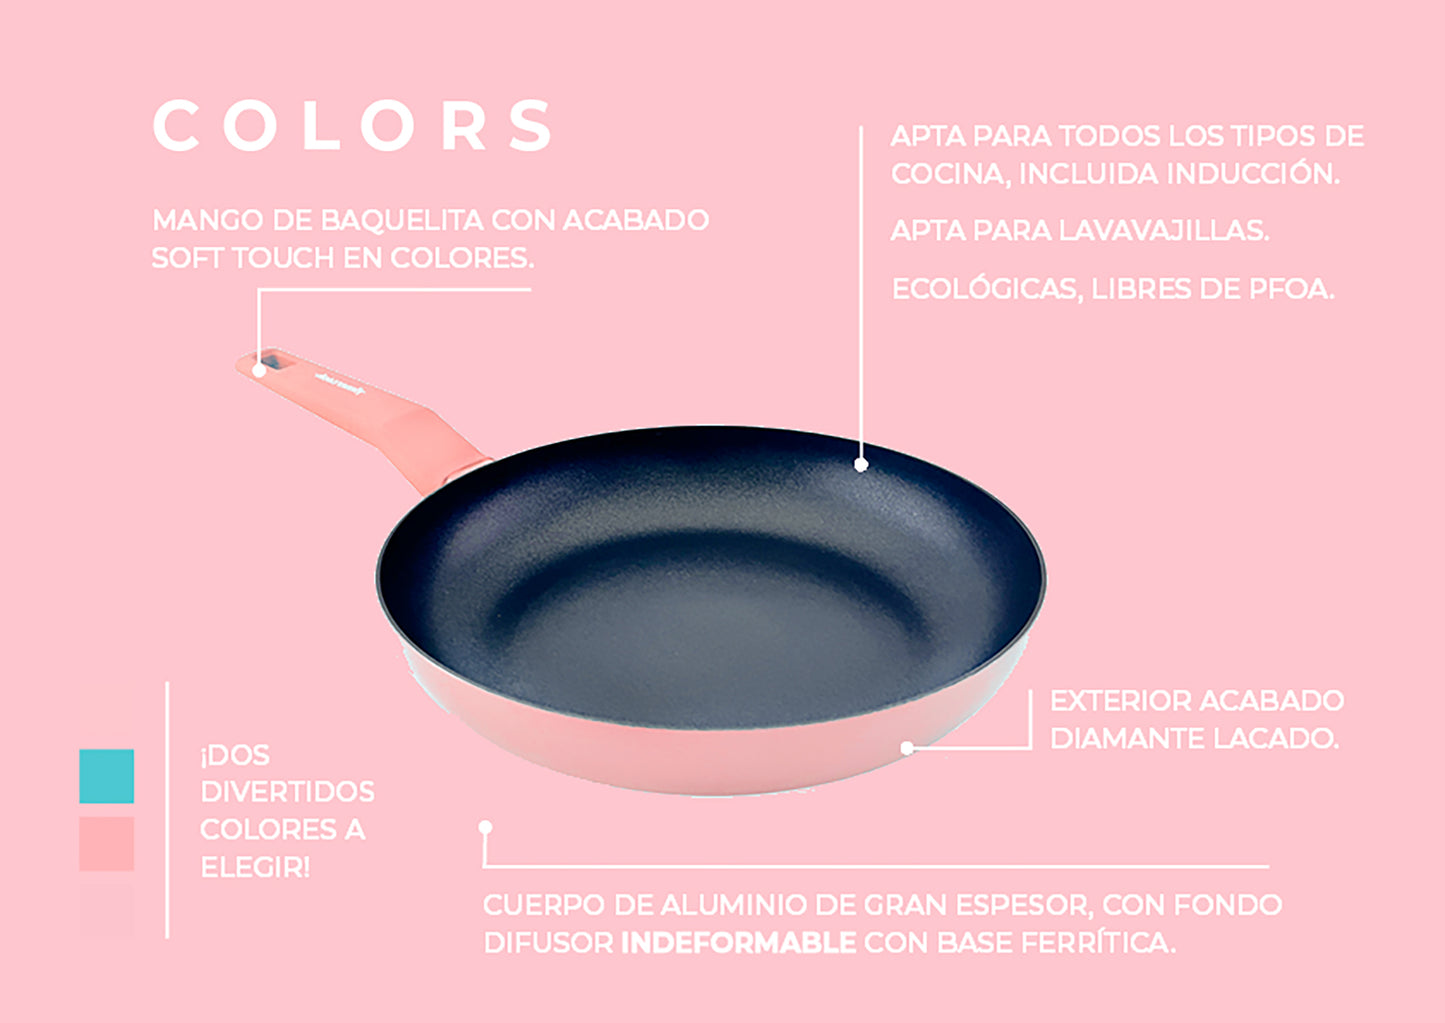 Pastel pink COLORS striped grill, square frying pan suitable for all types of cookers, including induction